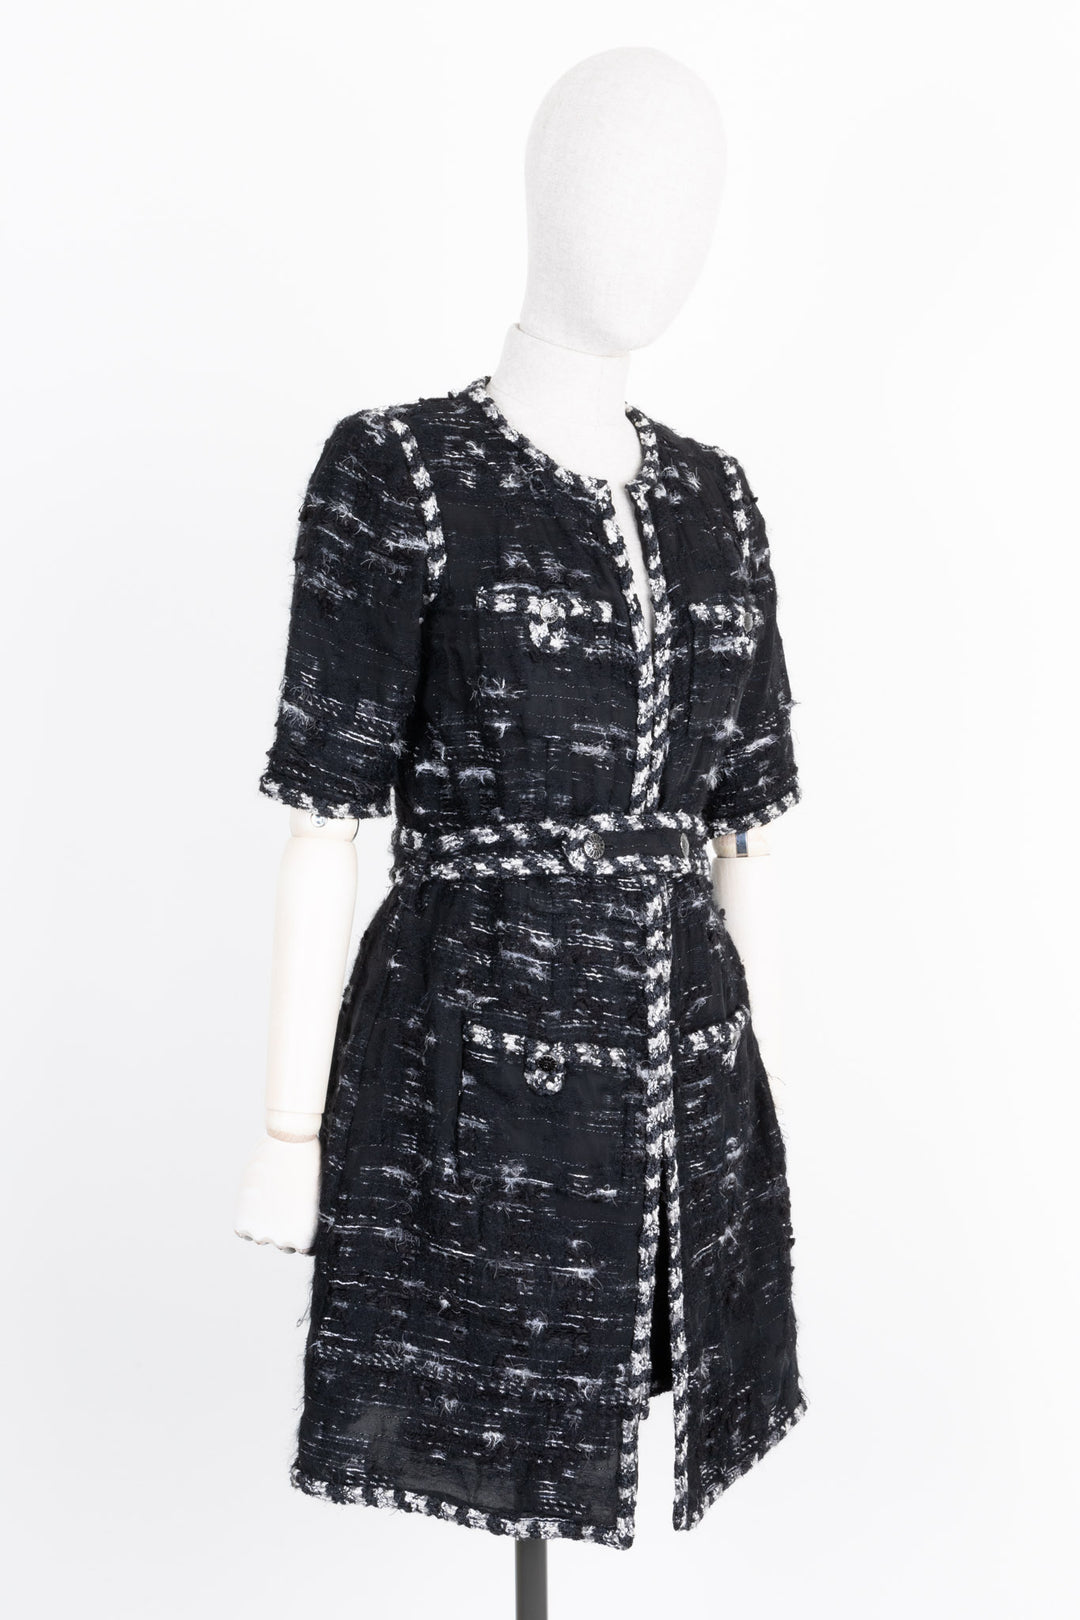 CHANEL Two Piece Tweed Black White